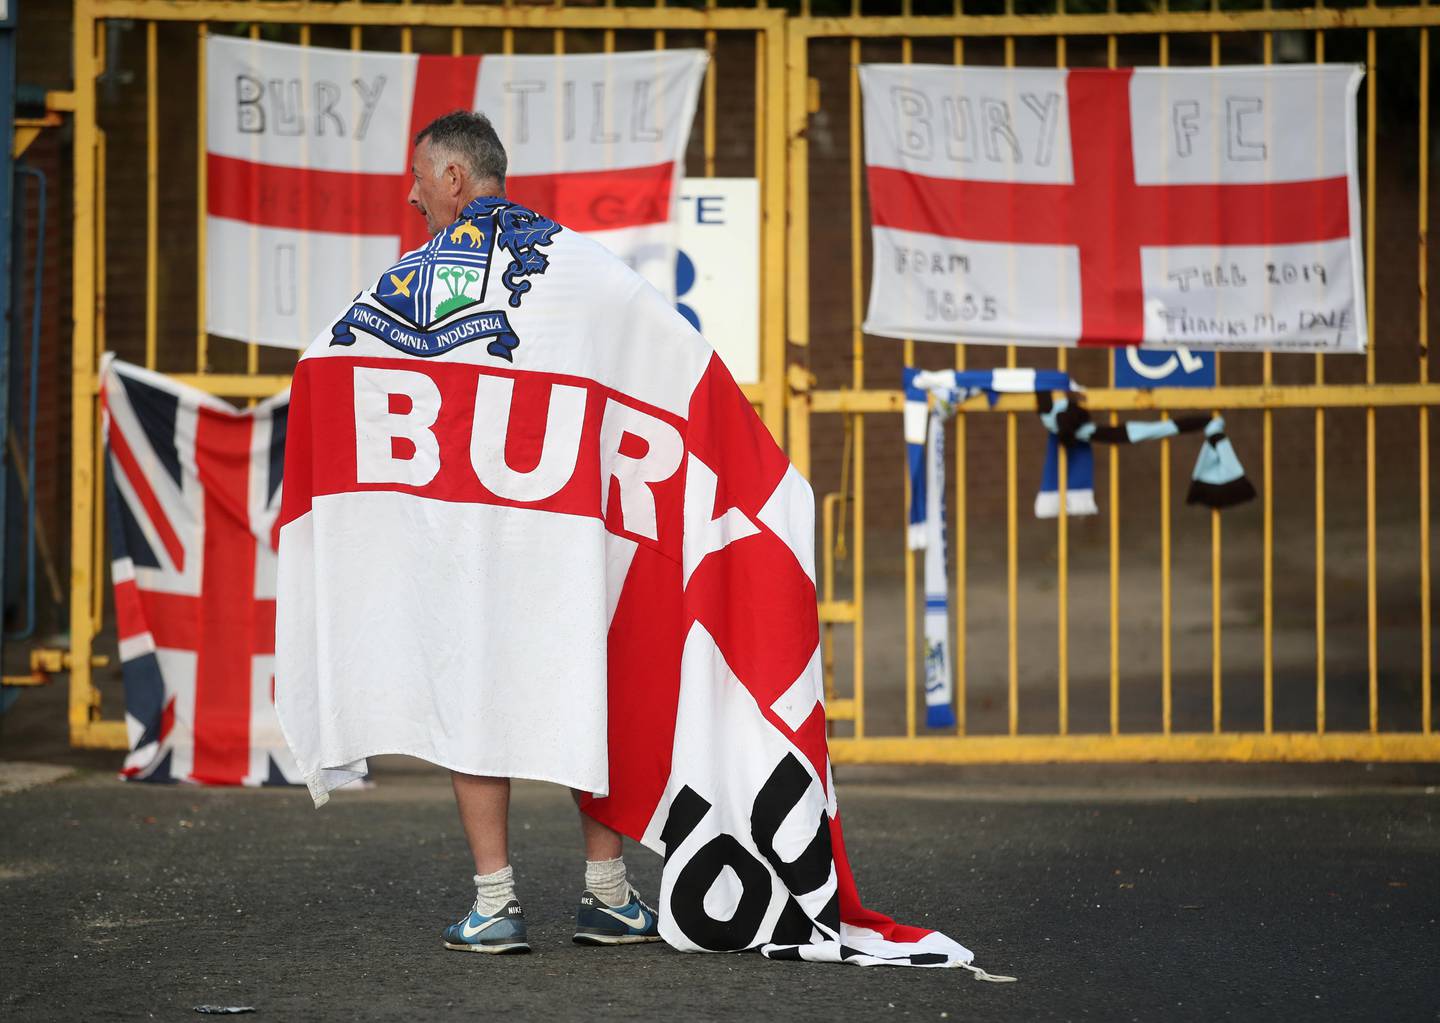 Soccer Football - Bury FC - Gigg Lane, Bury, Britain - August 27, 2019   A Bury FC fan wears a flag outside the stadium   Action Images via Reuters/Carl Recine       TPX IMAGES OF THE DAY